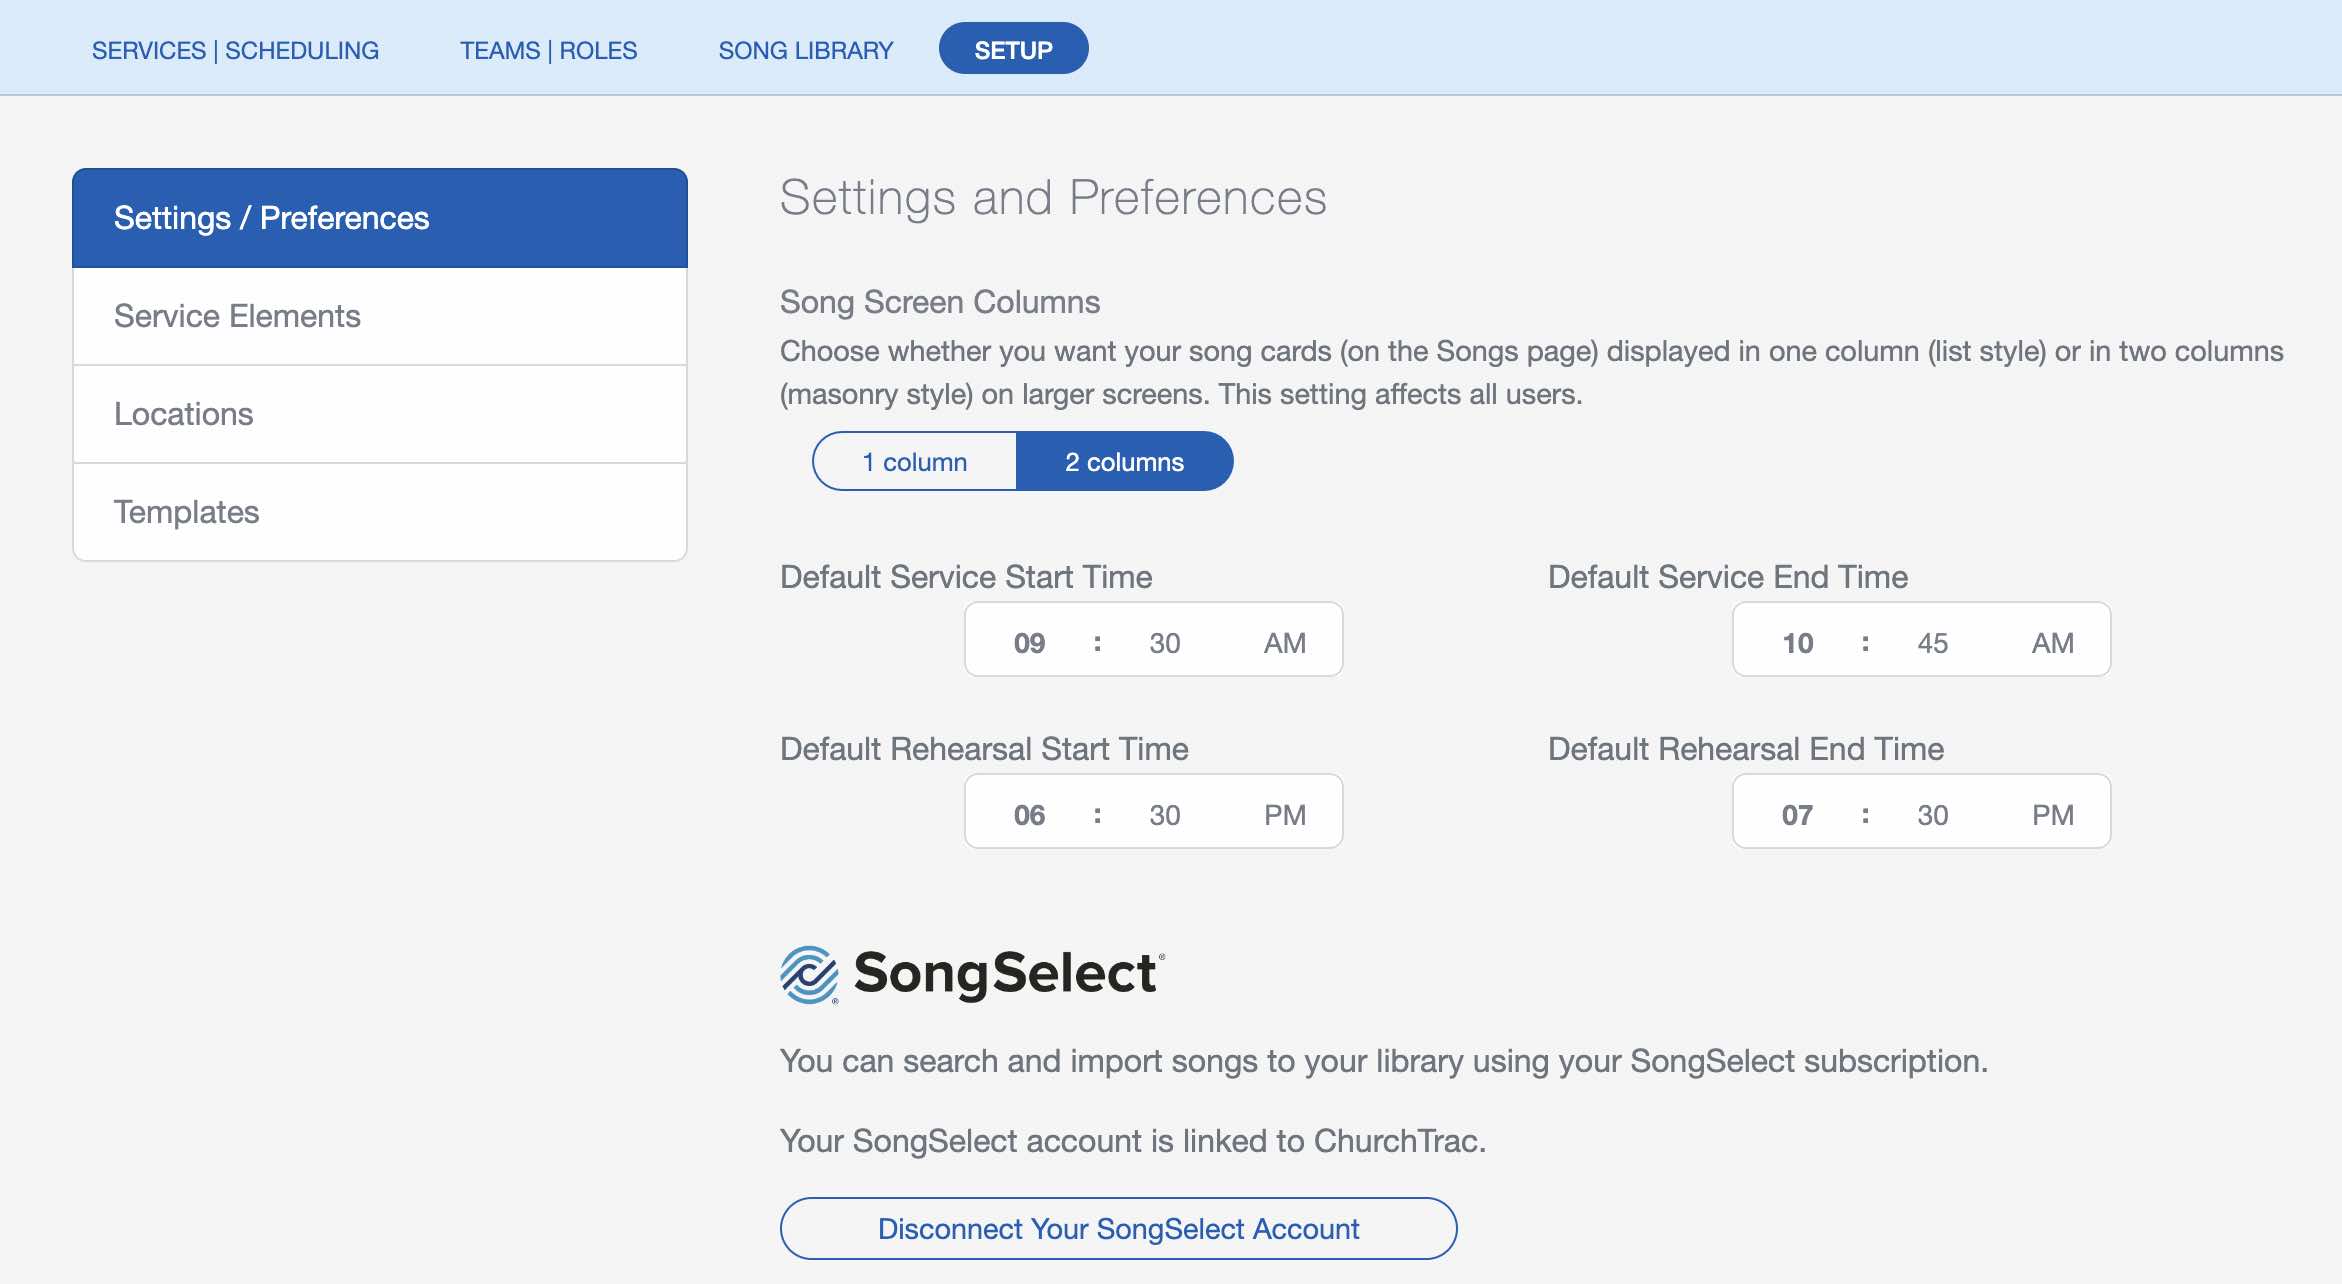 Worship Scheduling Software Settings